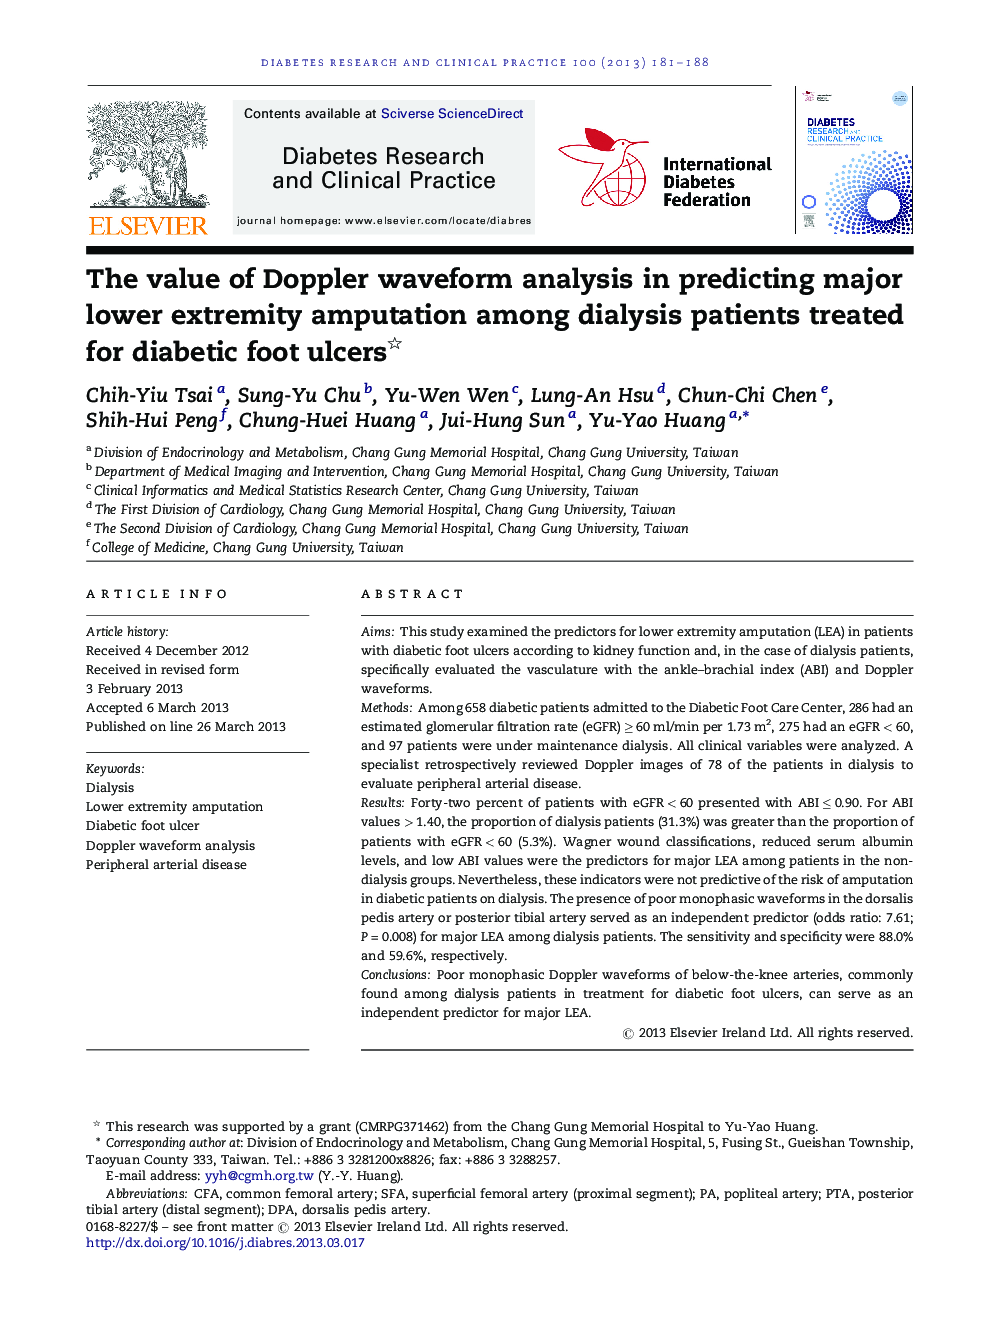 The value of Doppler waveform analysis in predicting major lower extremity amputation among dialysis patients treated for diabetic foot ulcers 